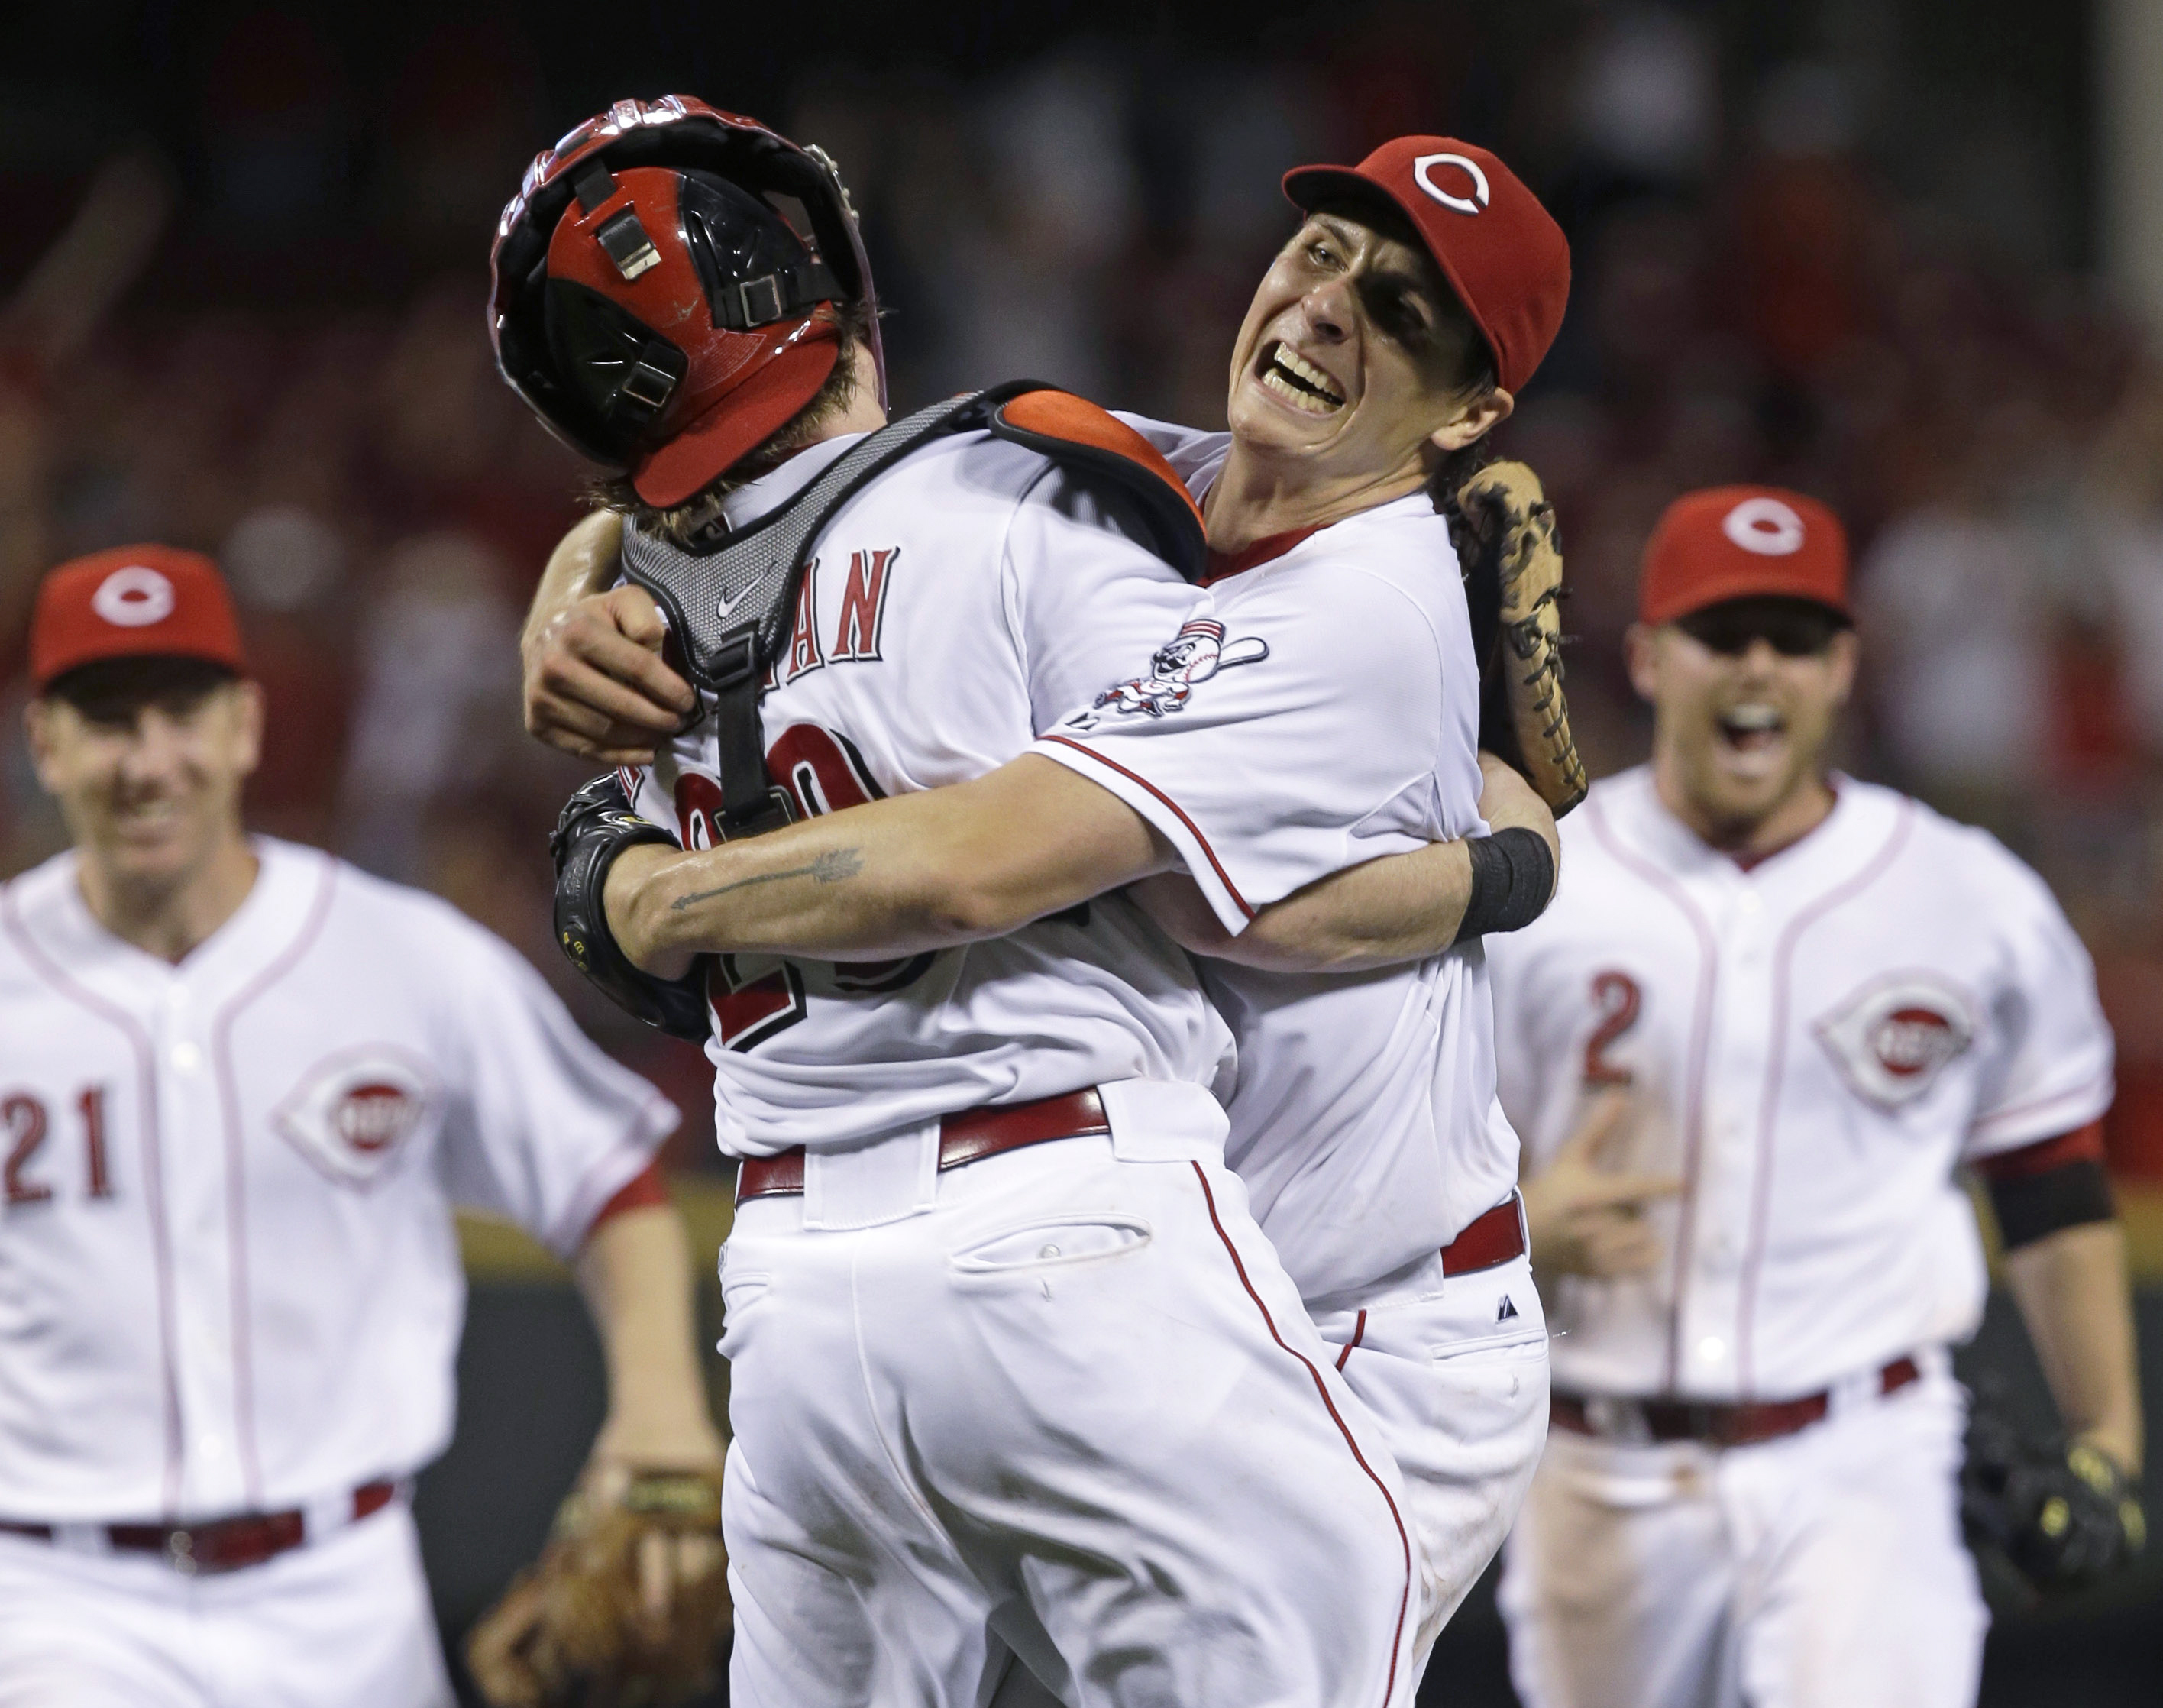 Cincinnati Reds starting pitcher Homer Bailey, right, hugs catcher Ryan Hanigan, left, after Bailey threw a no-hitter against the San Francisco Giants in a baseball game, Tuesday, July 2, 2013, in Cincinnati.